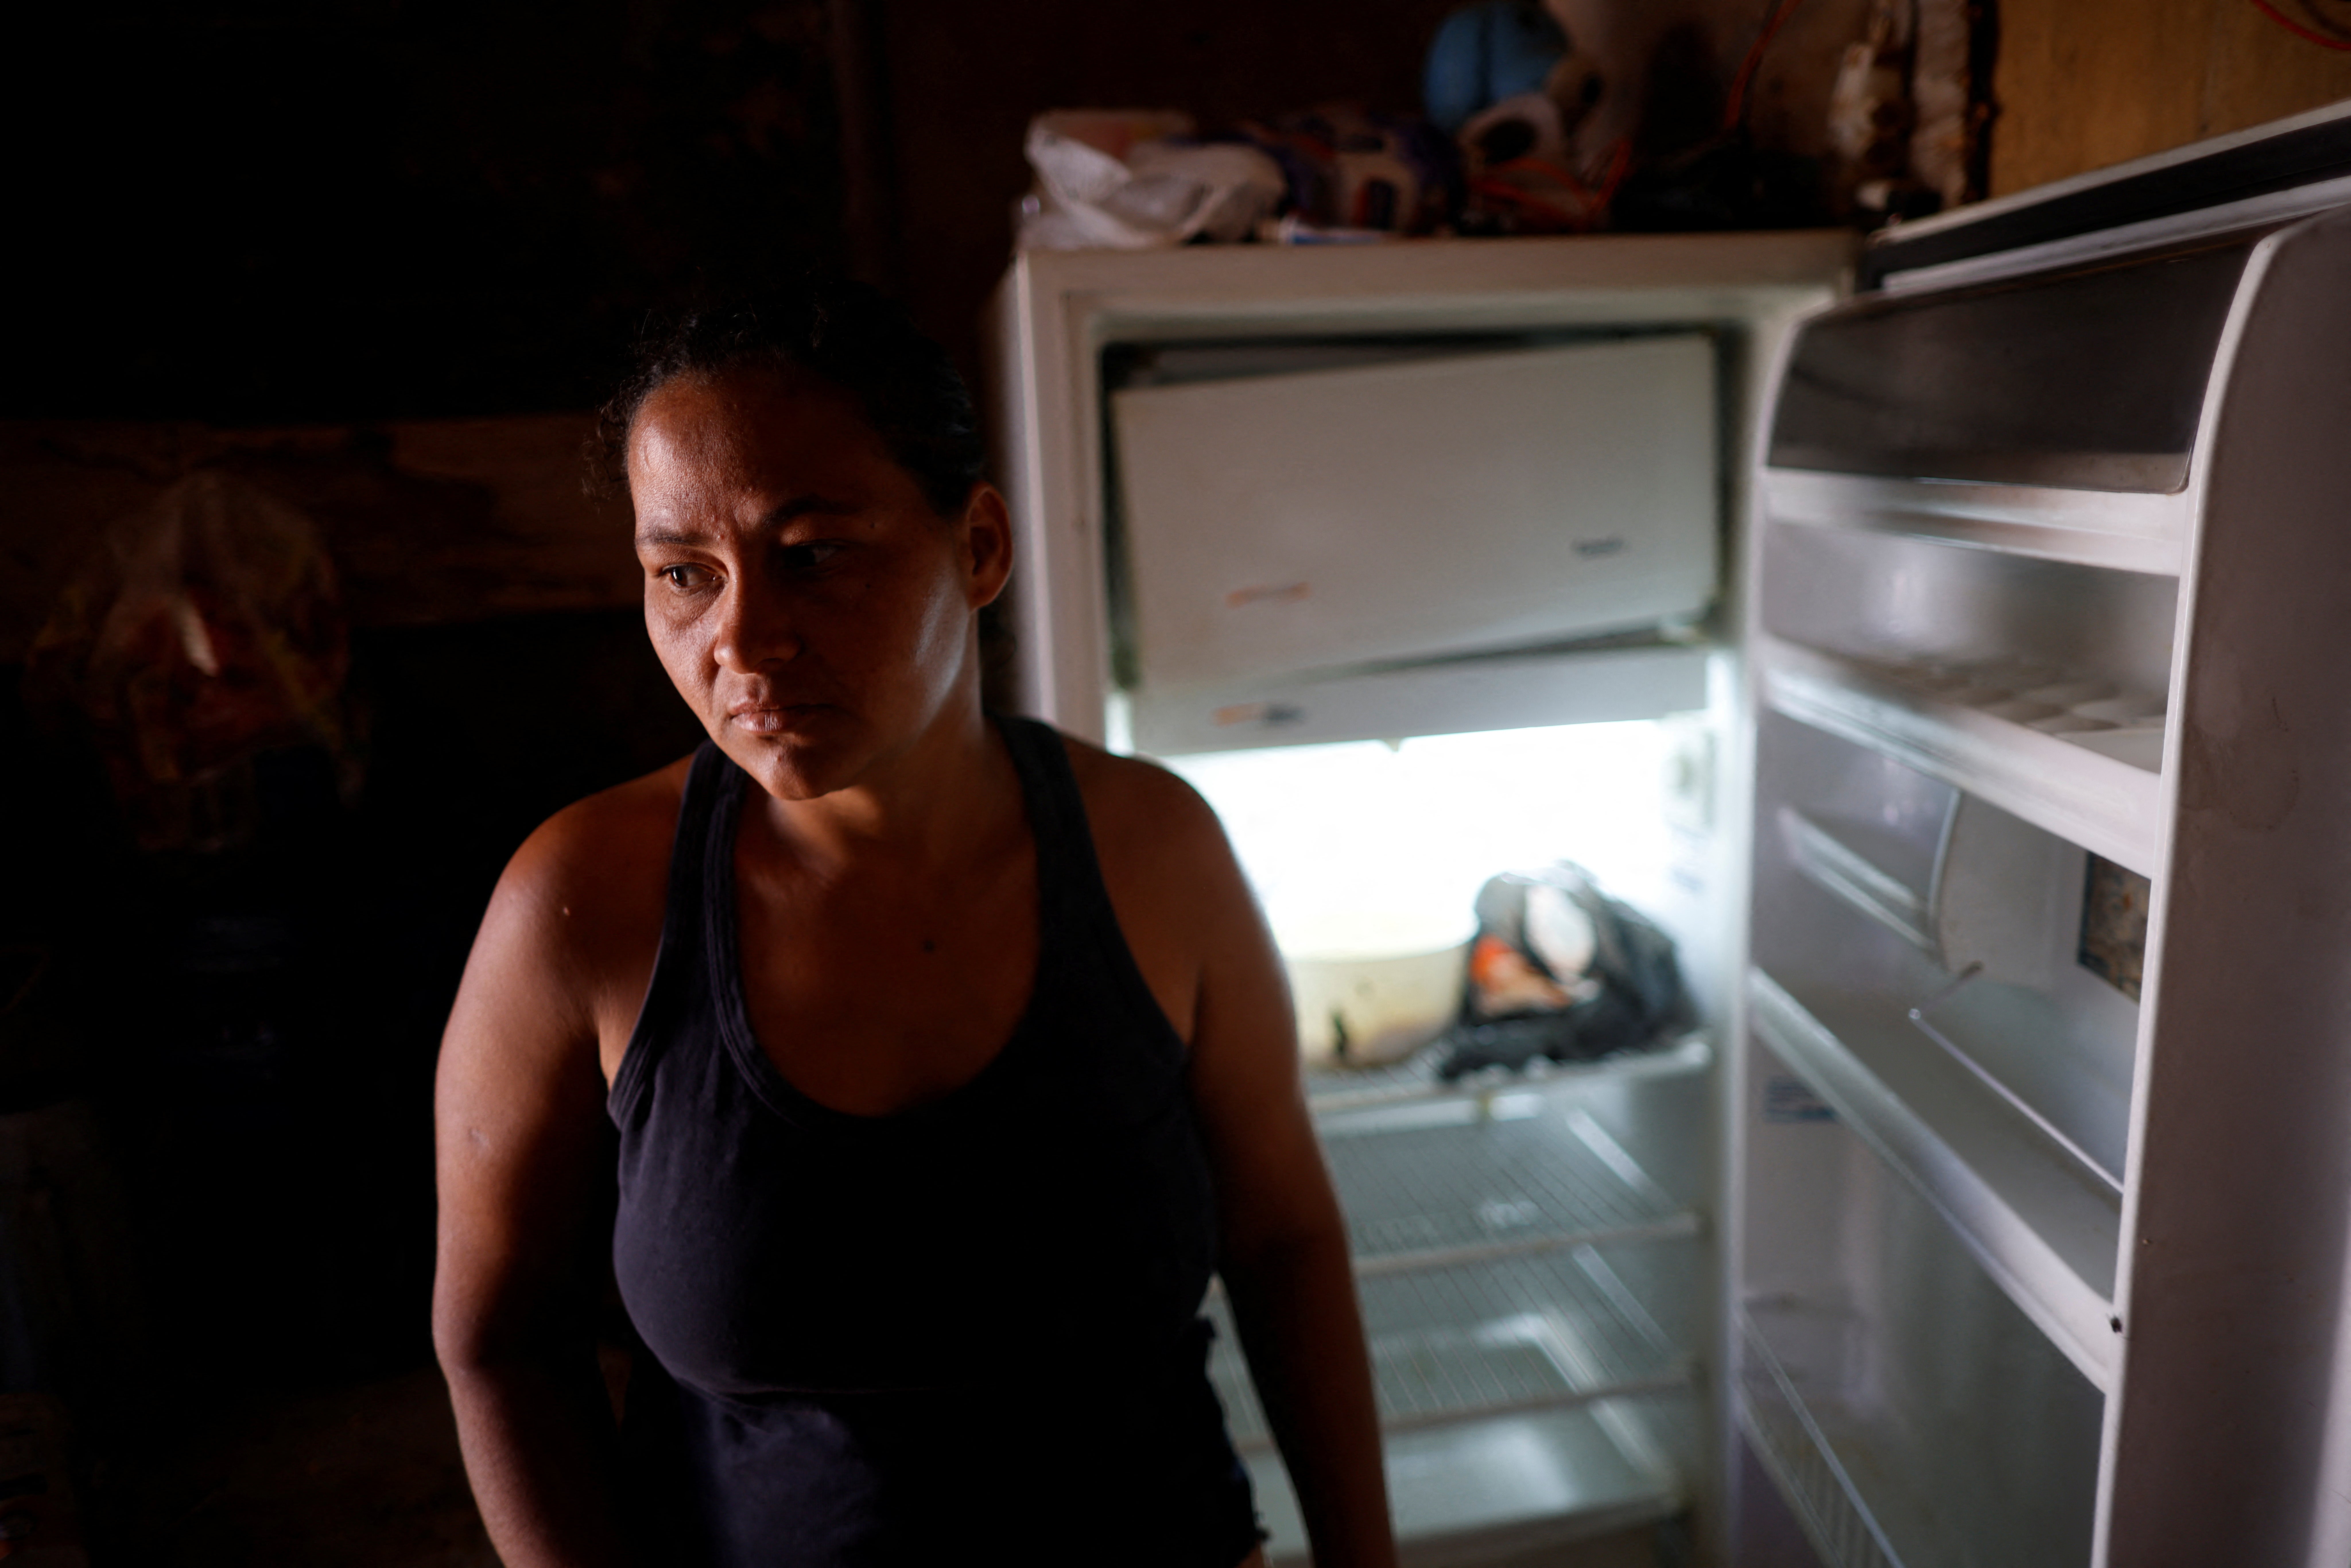 Luciana Messias dos Santos, 29, poses for a picture in front of her empty fridge at her home in the Estrutural favela in Brasilia